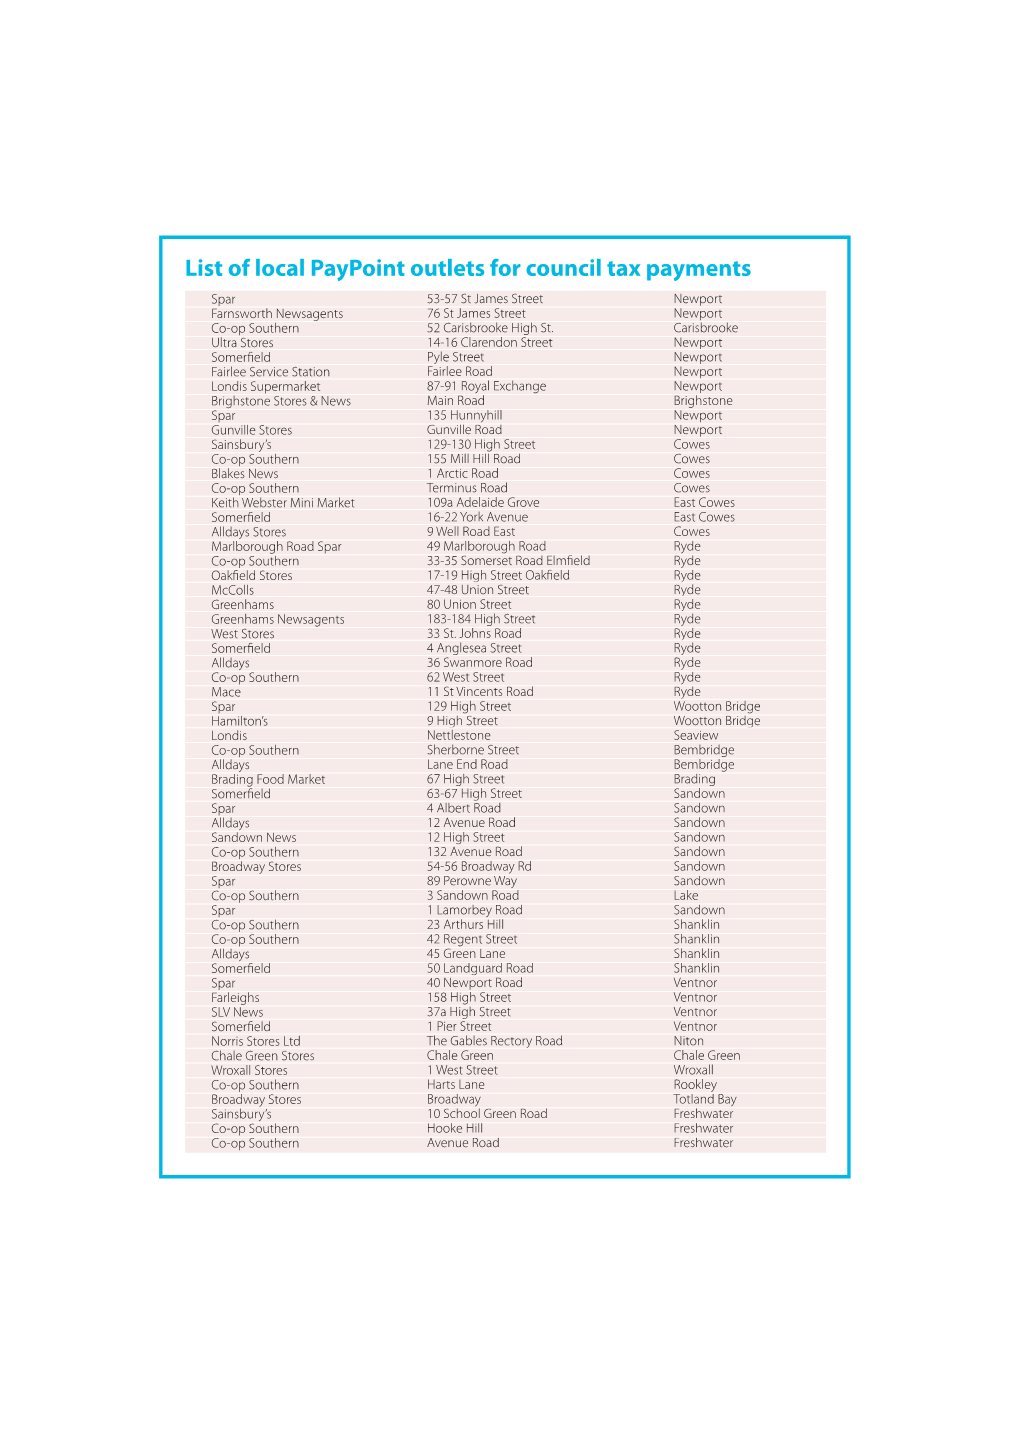 List of Local Paypoint Outlets for Council Tax Payments